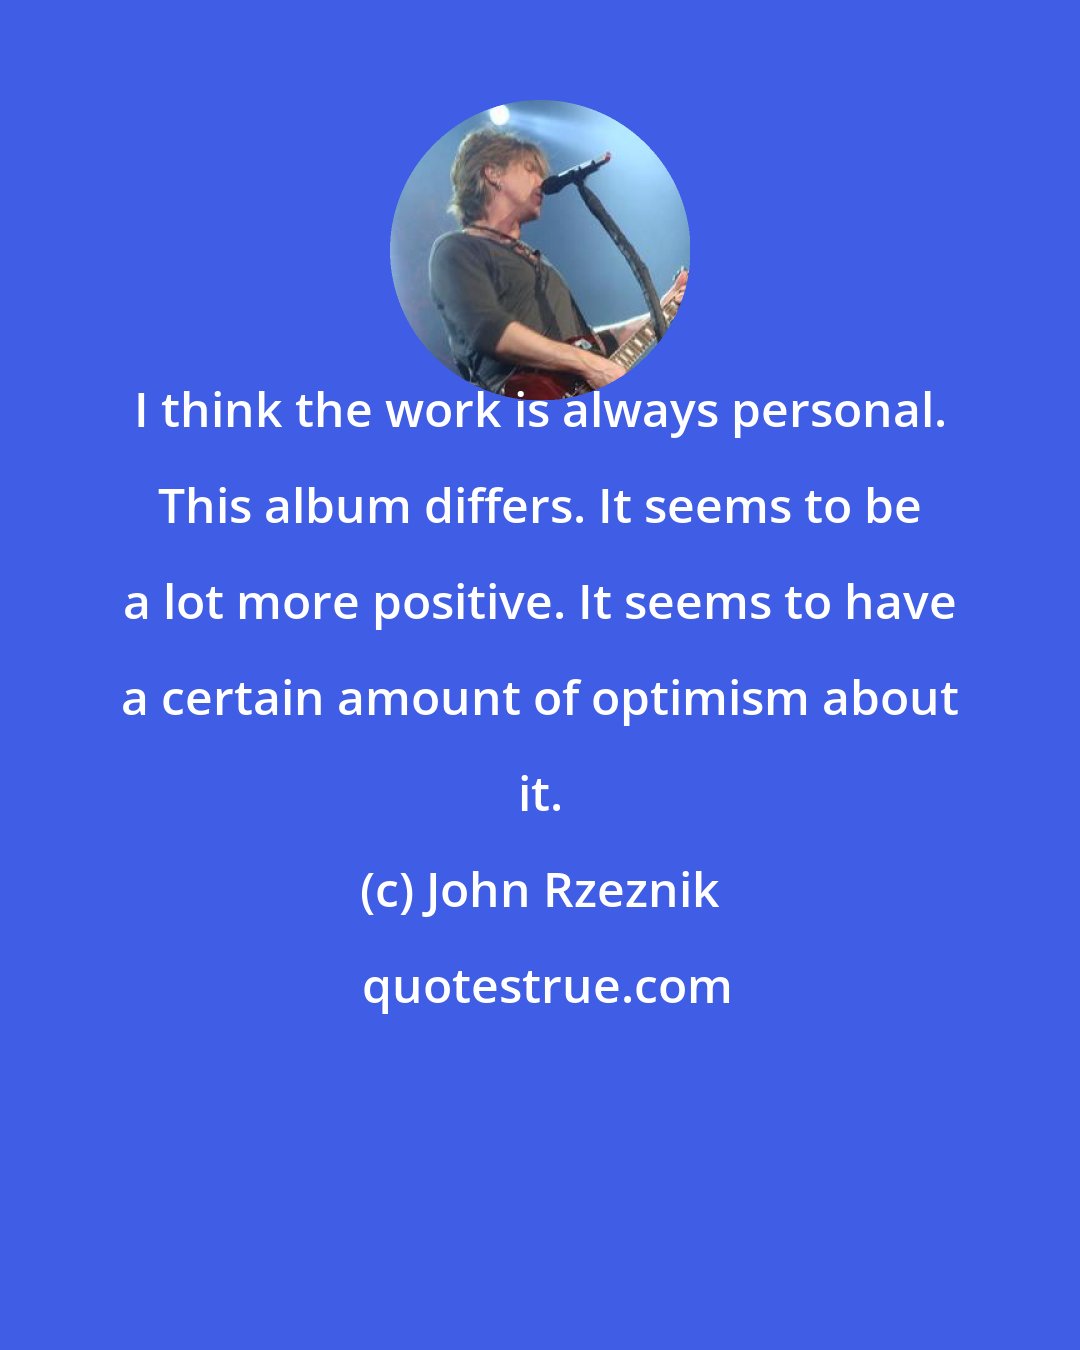 John Rzeznik: I think the work is always personal. This album differs. It seems to be a lot more positive. It seems to have a certain amount of optimism about it.